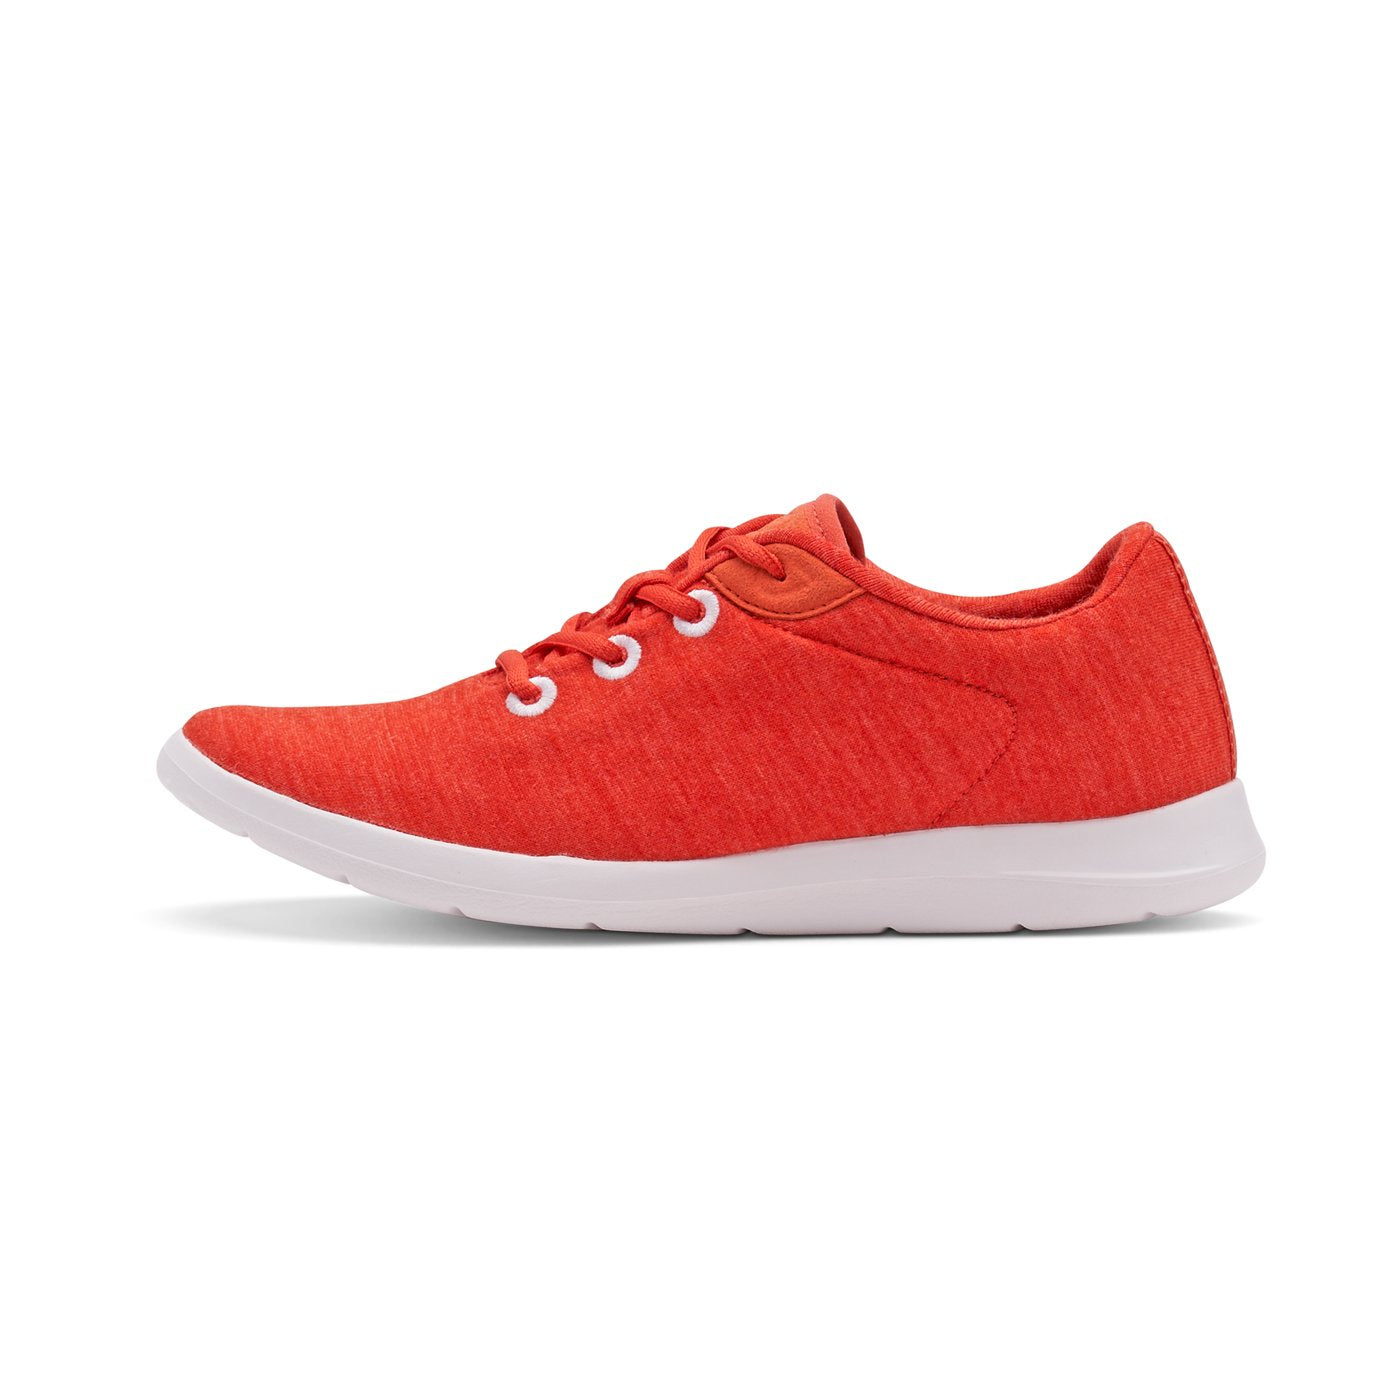 Women's Lace-Ups Coral